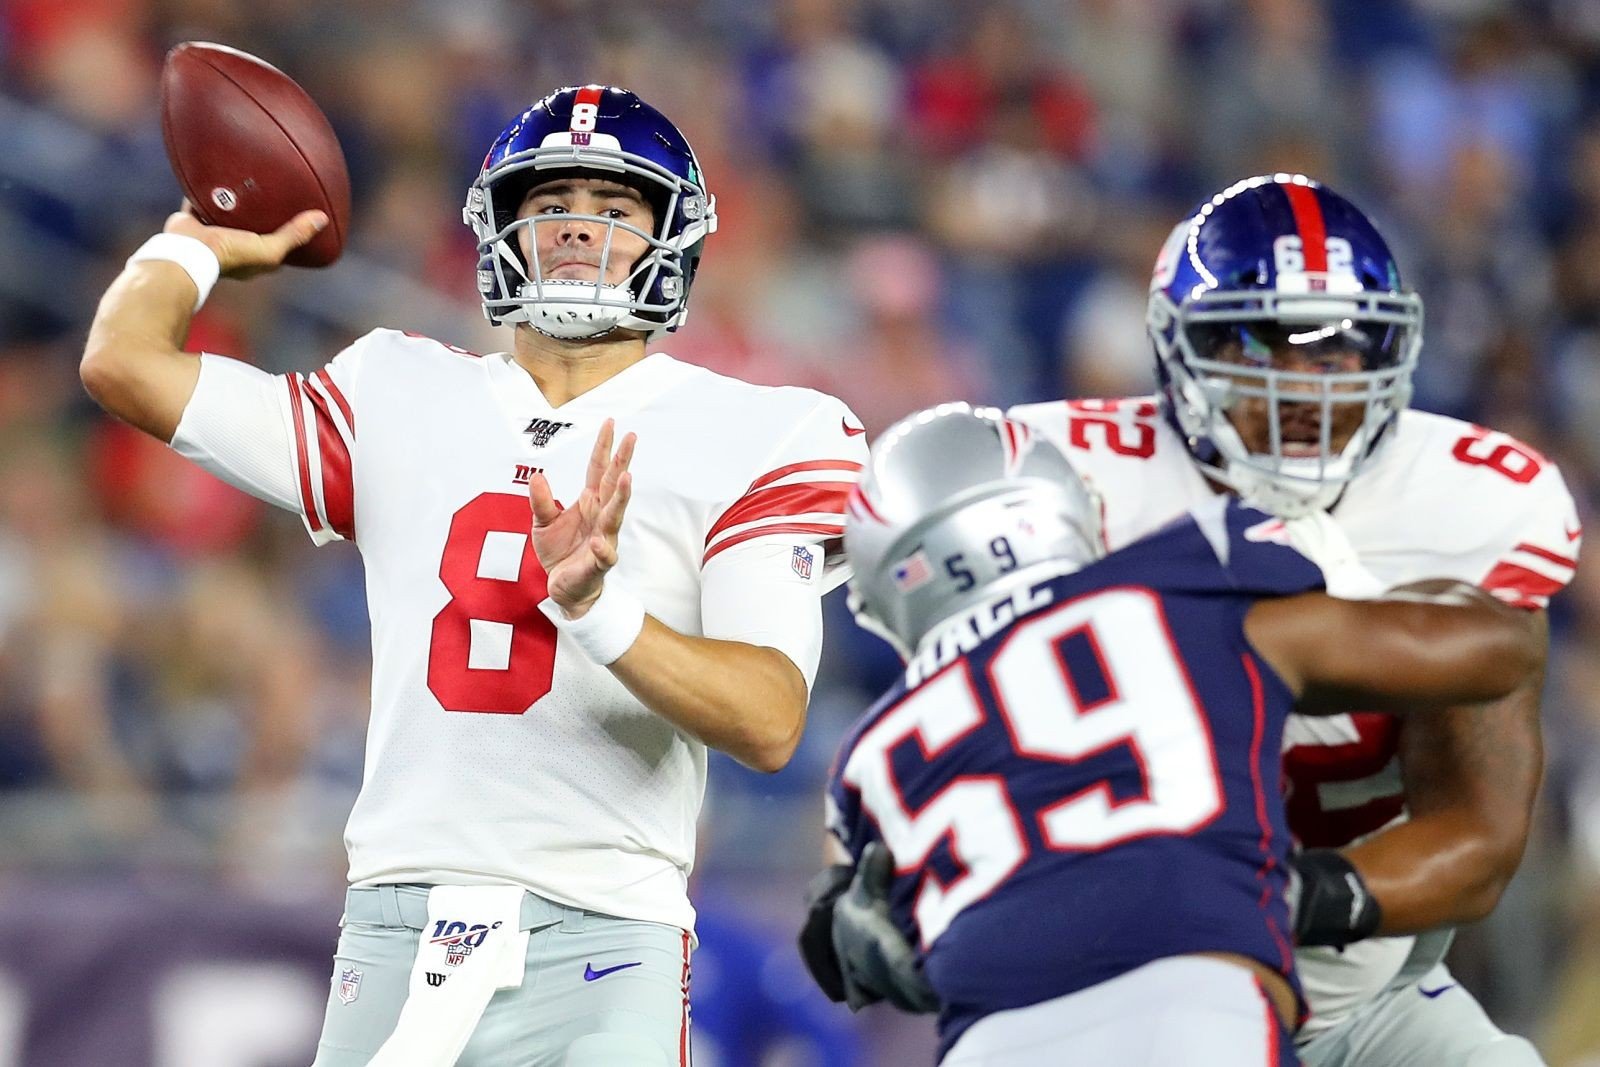 New England Patriots vs. New York Giants live stream: How to watch